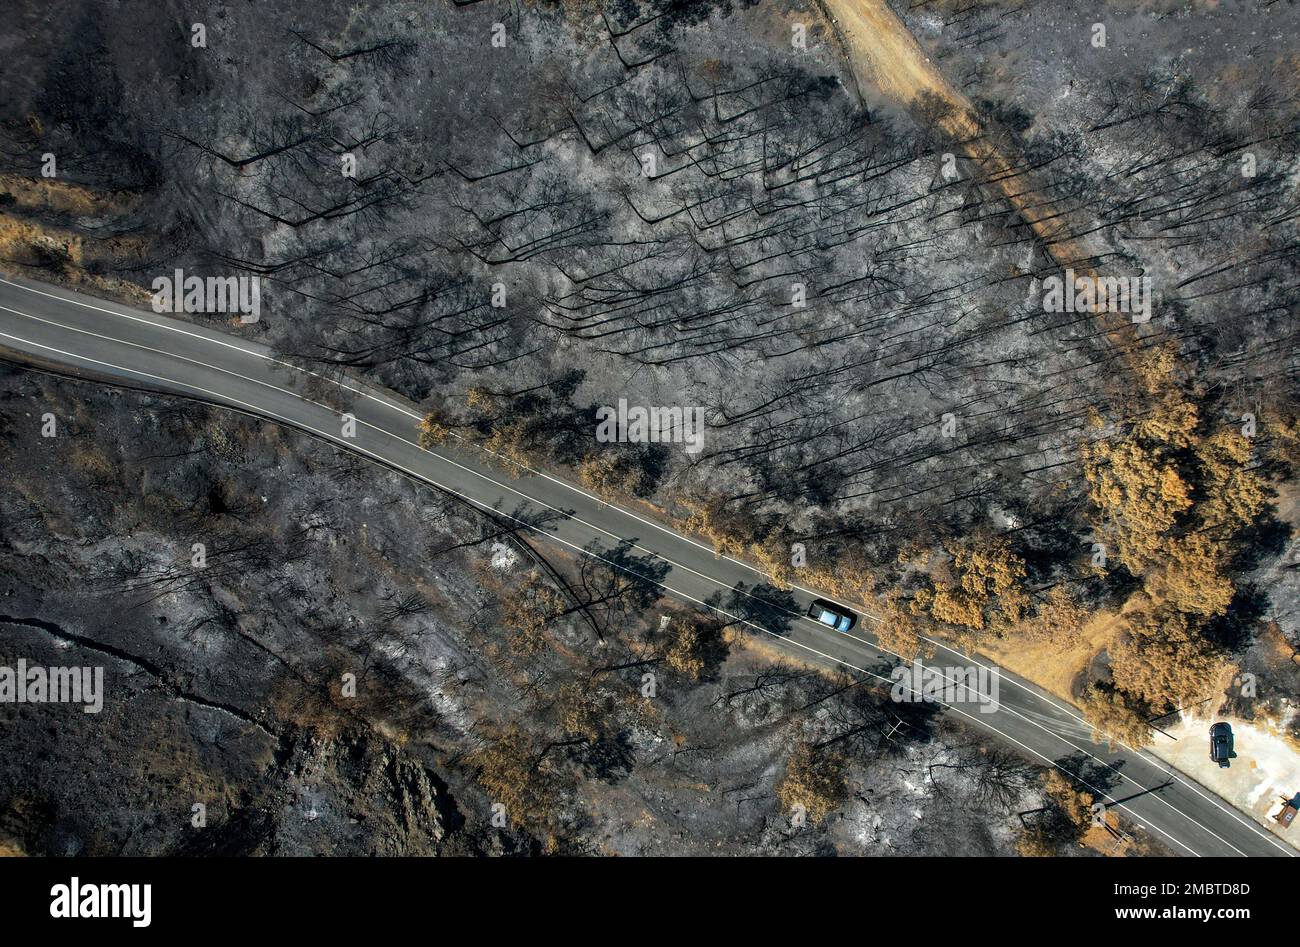 Road passing through a burned forest. Nature disaster forest fire. Cyprus Europe Stock Photo